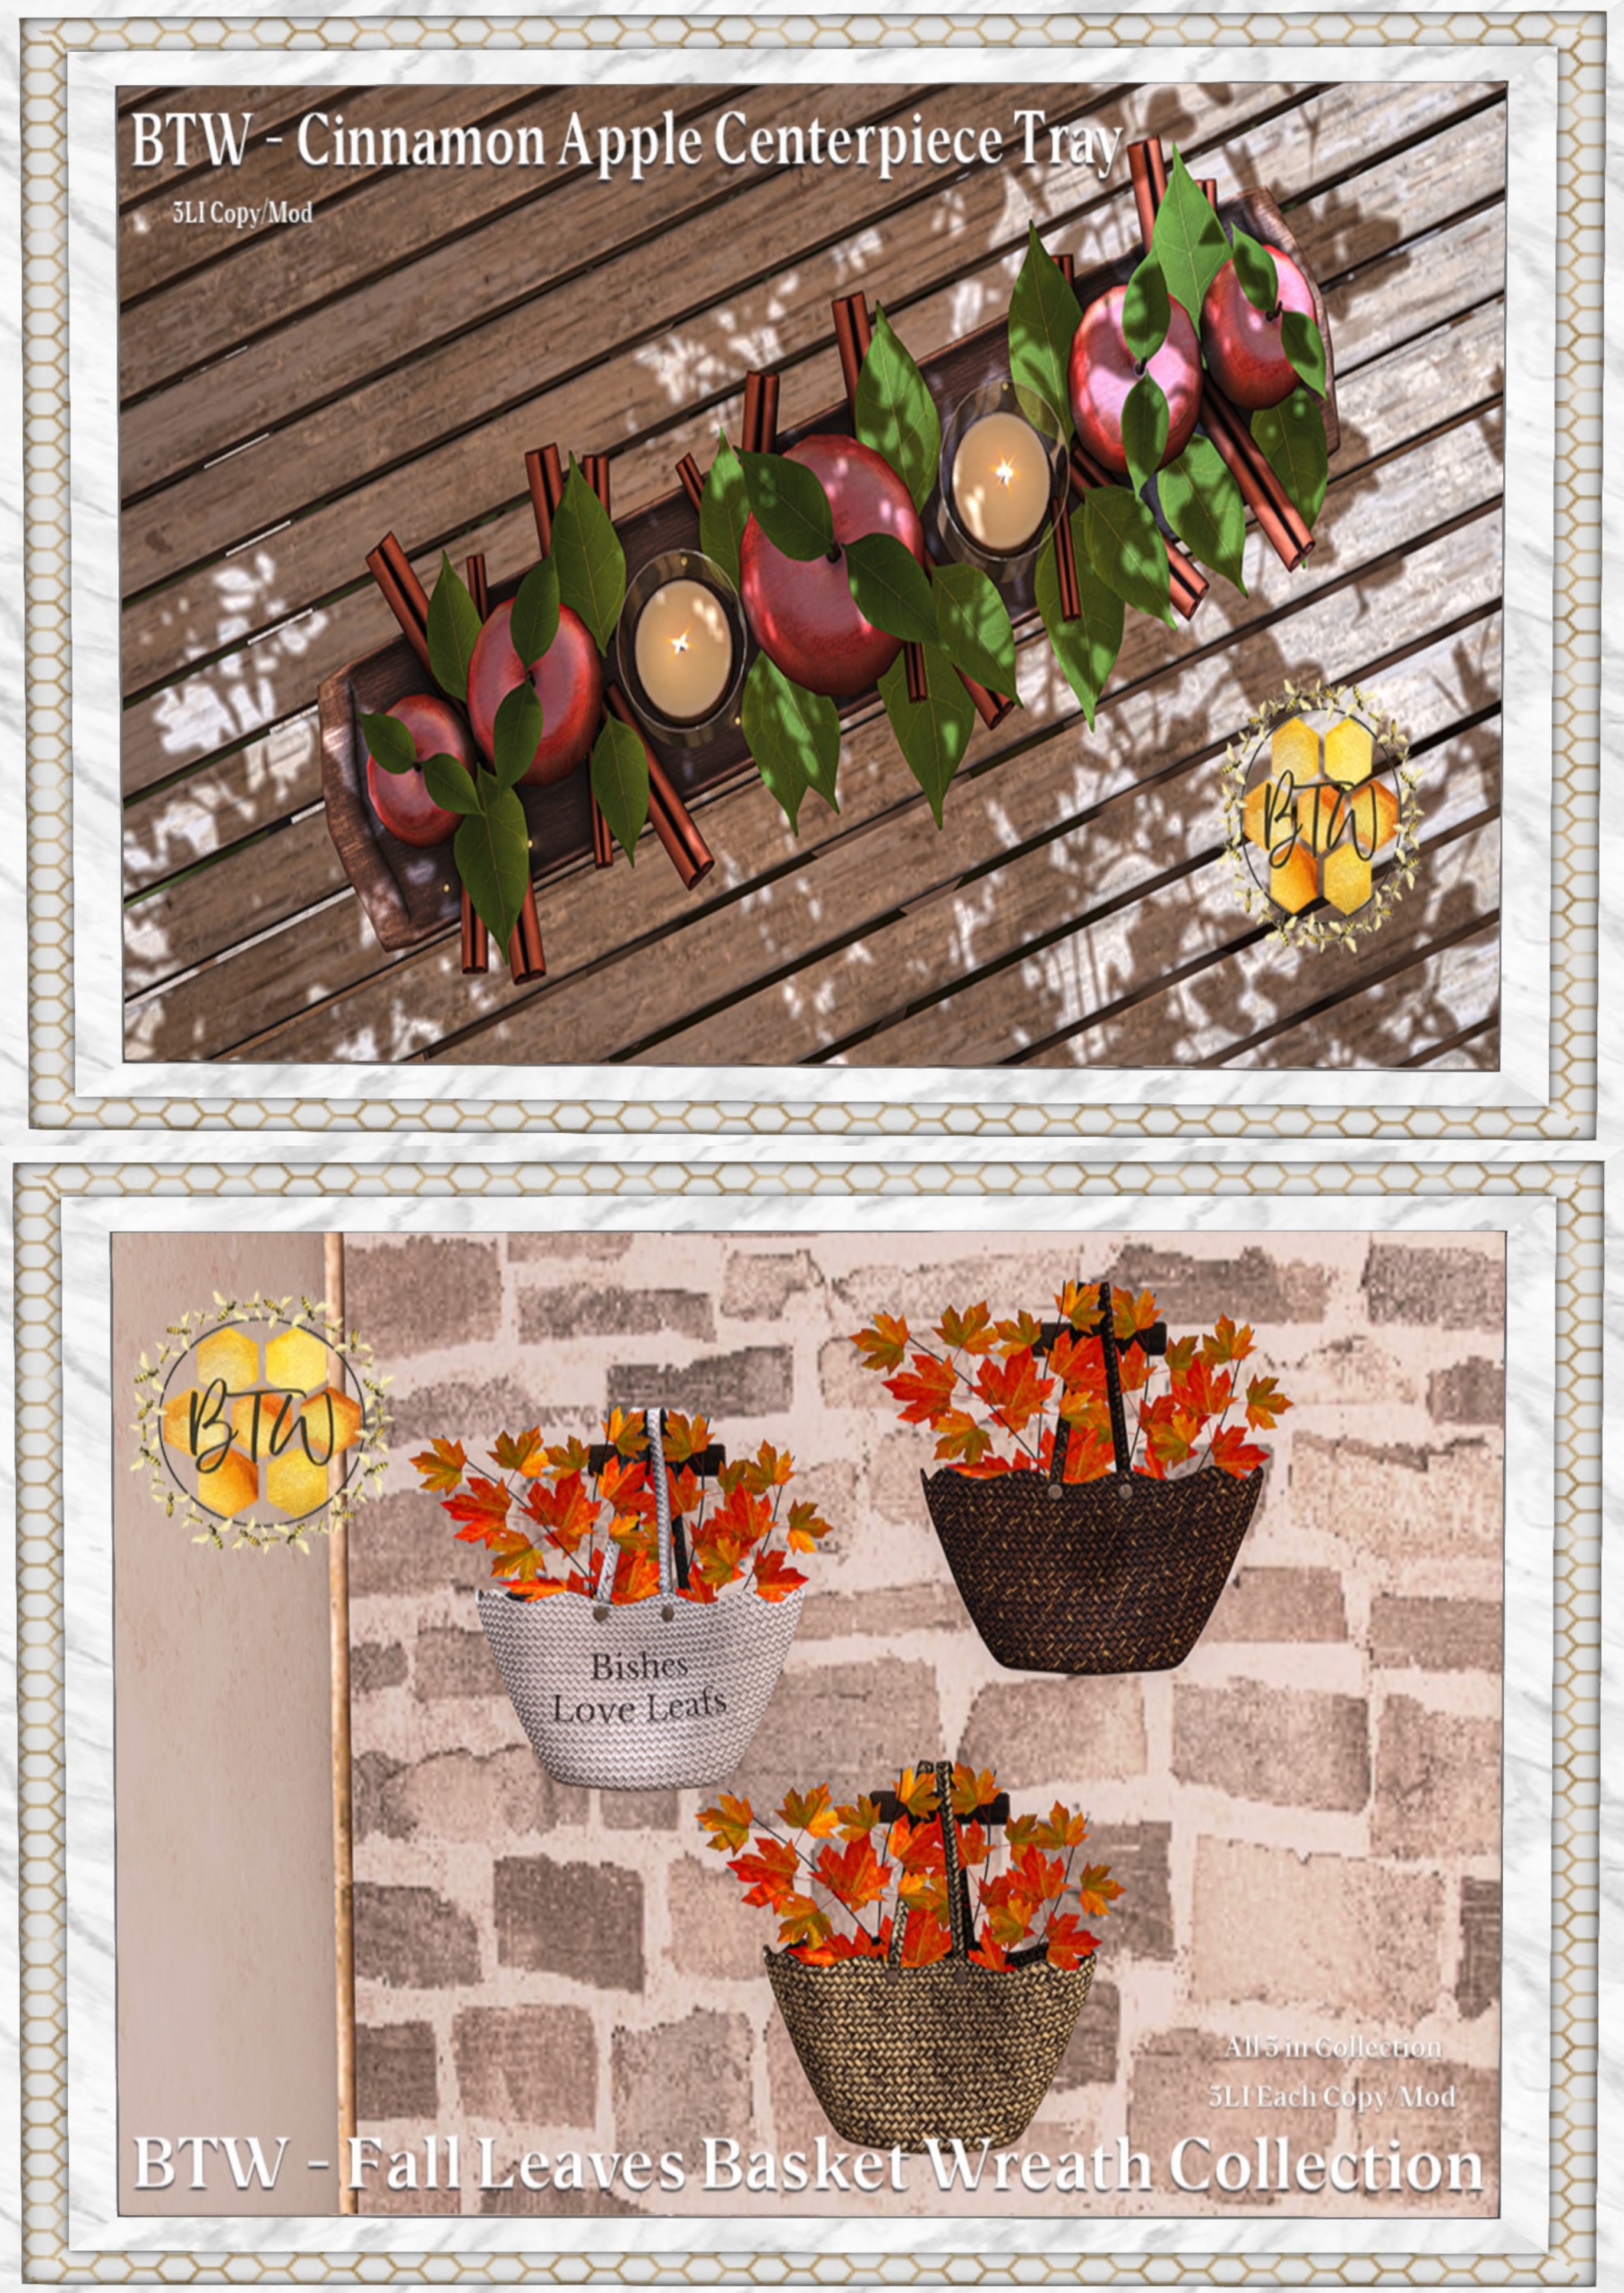 BTW – Cinnamon Apple Centerpiece Tray and Fall Leaves Basket Wreath Collection